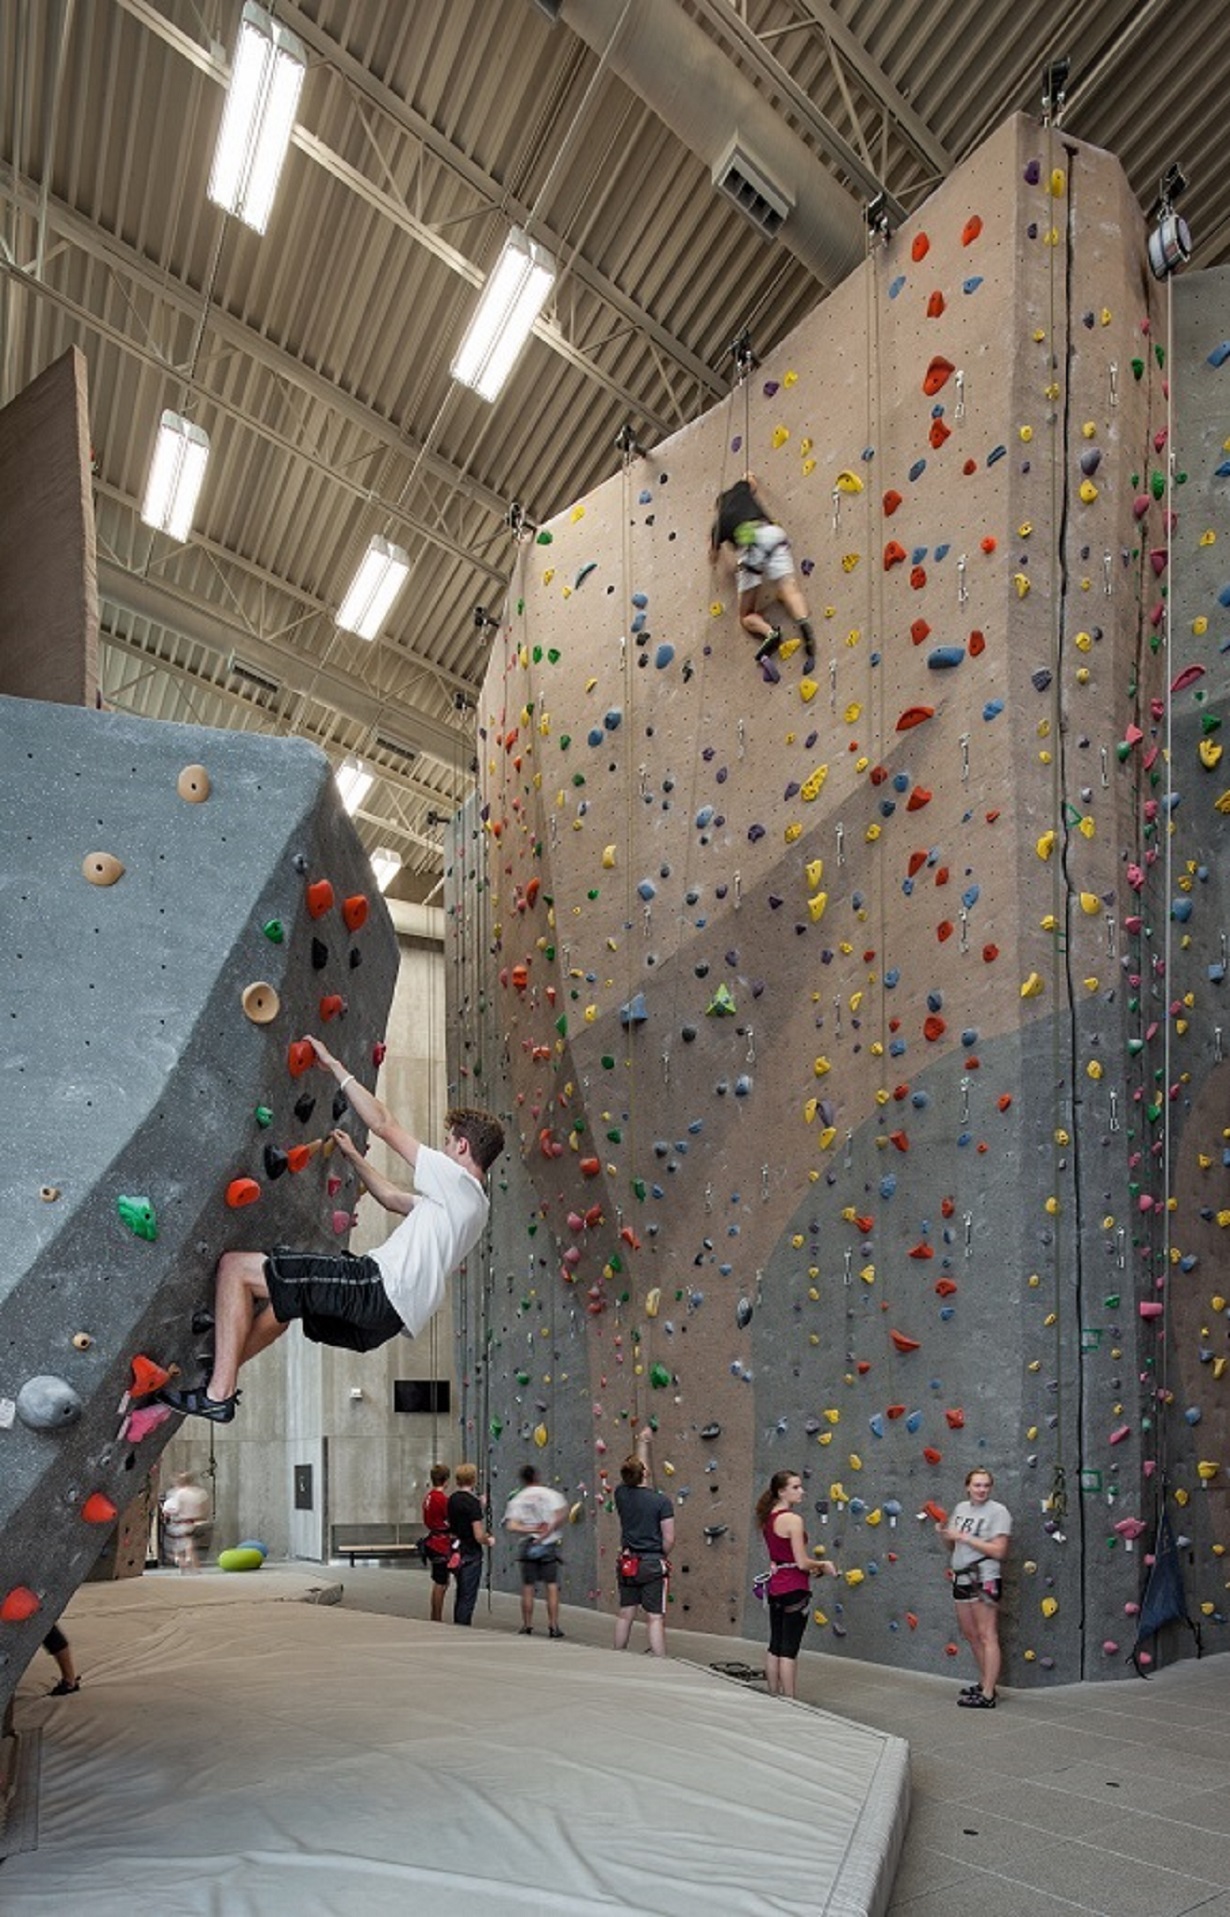 The on-campus Outdoor Adventures Center houses a 3-story indoor climbing gym.